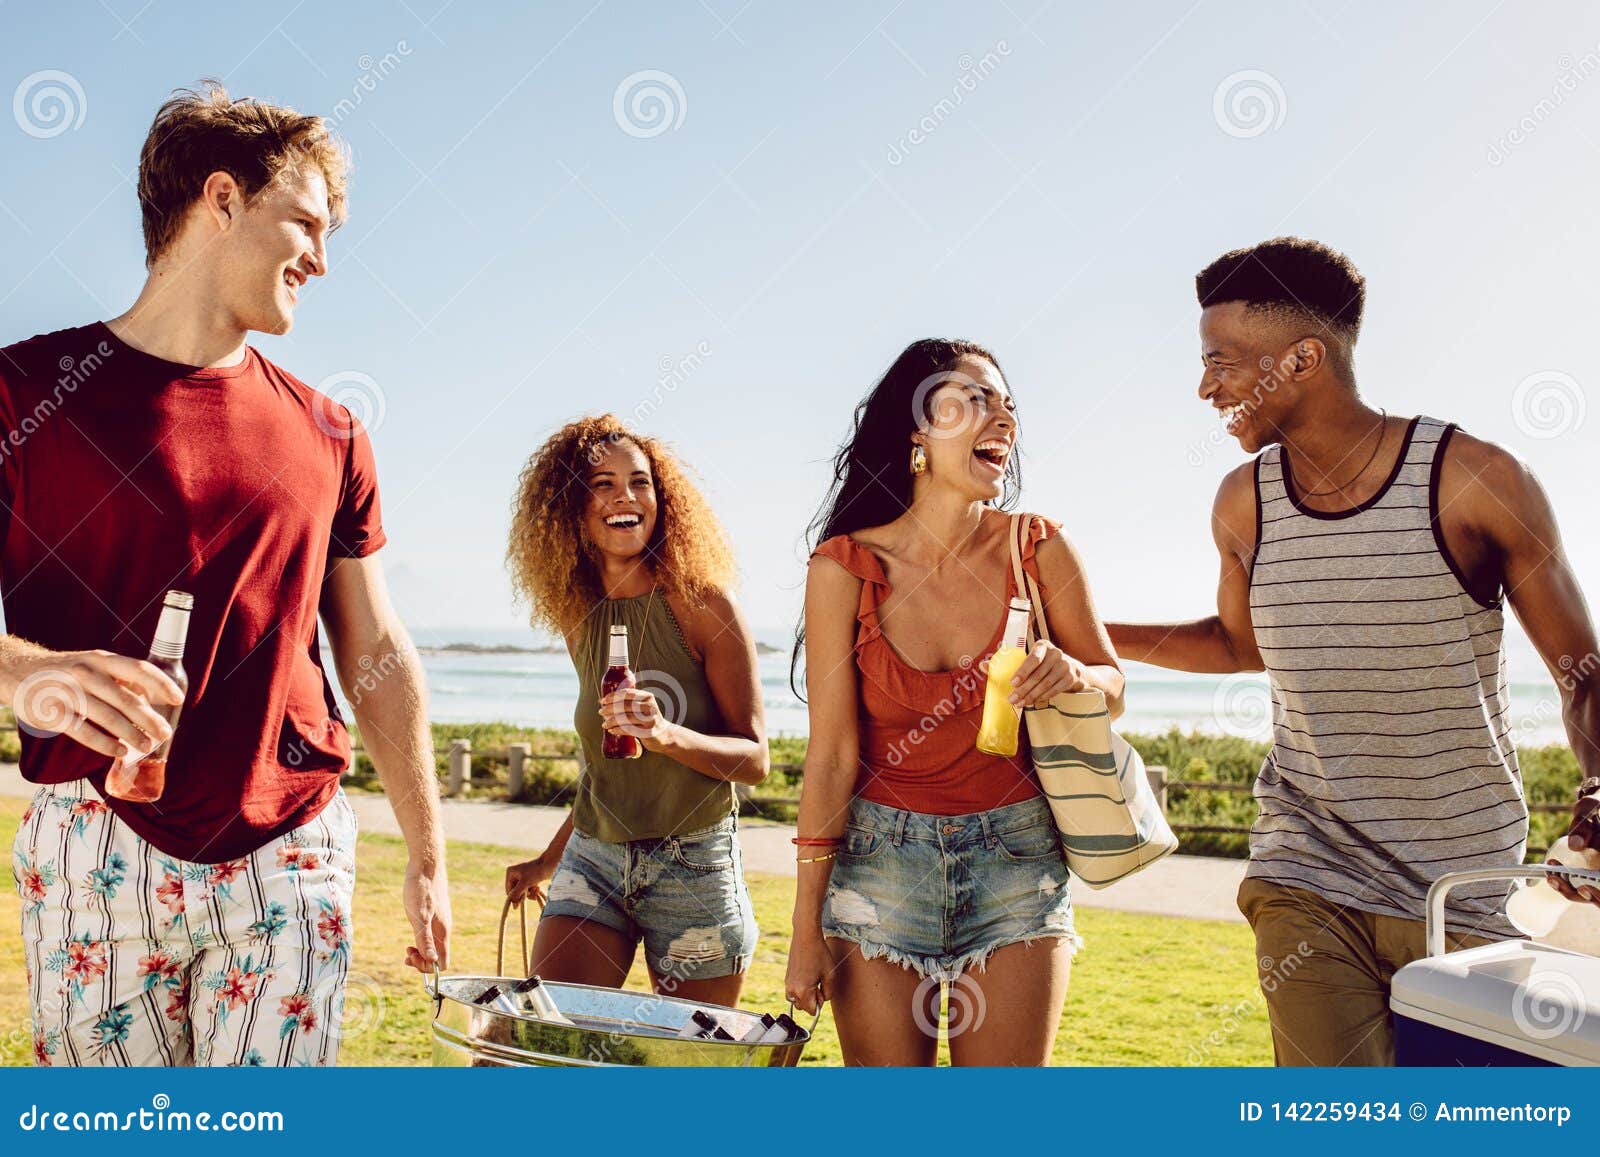 Friends summer beach party stock photo. Image of summer - 142259434